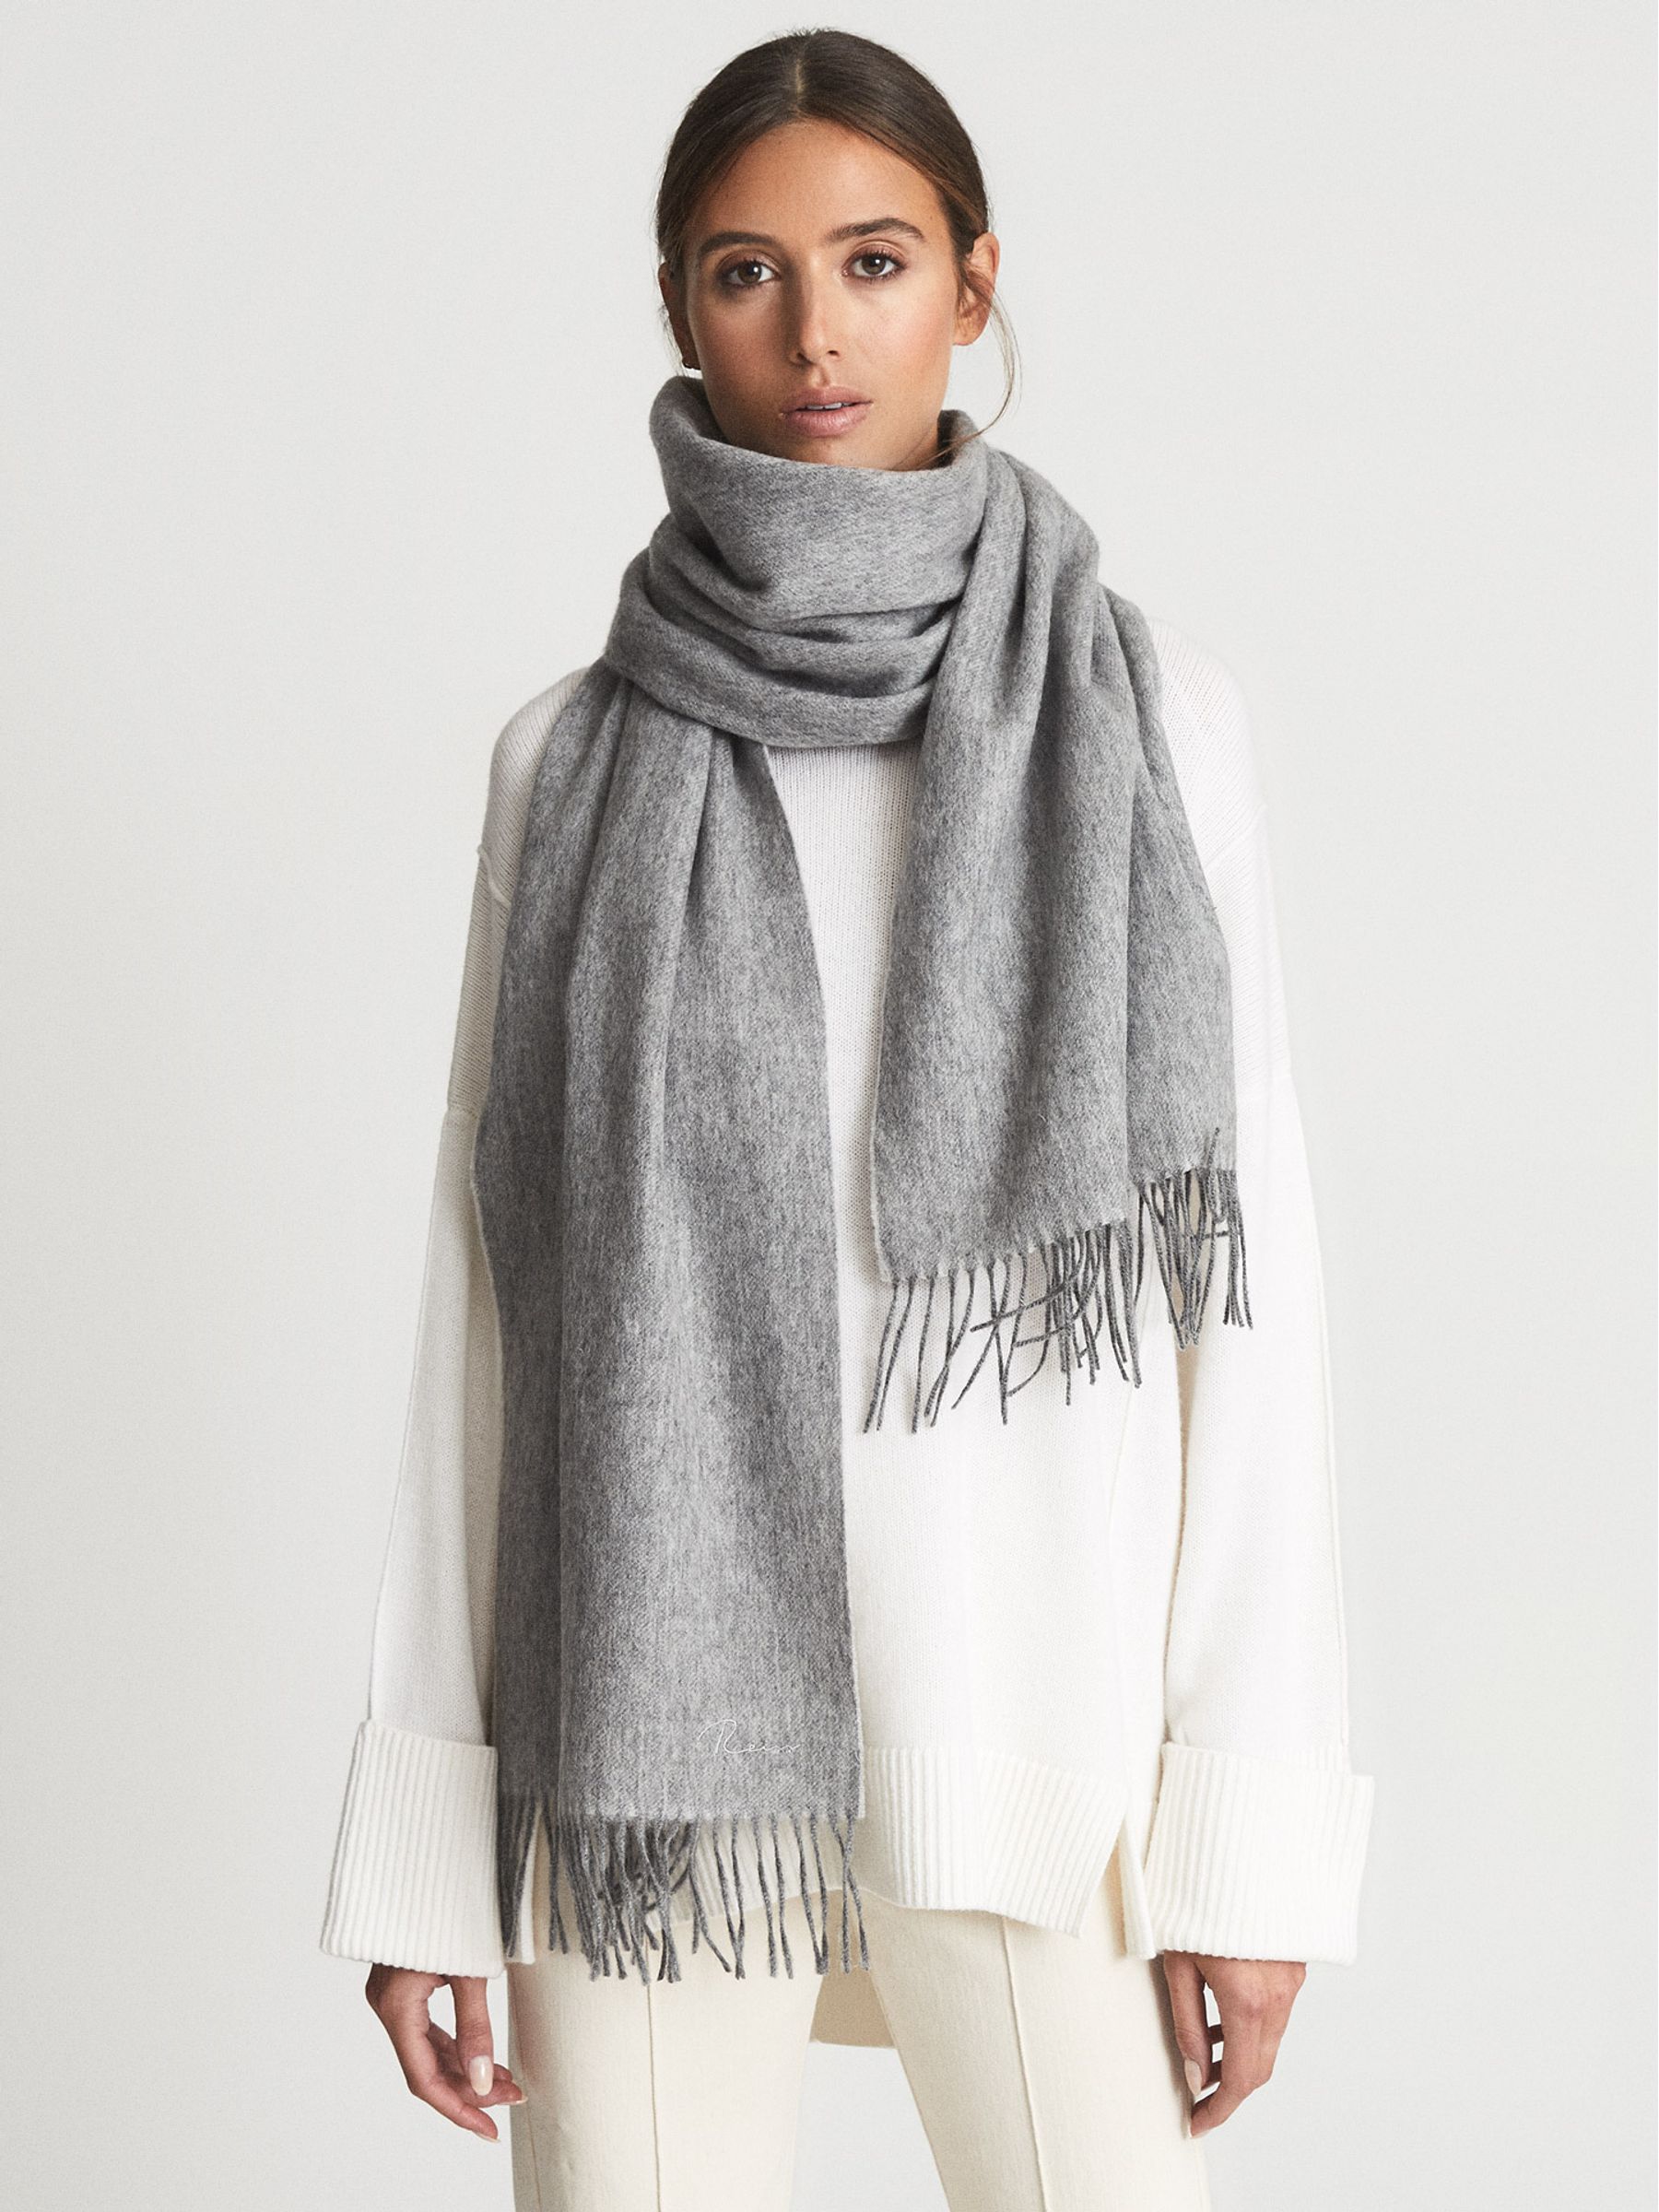 Reiss Picton Cashmere Blend Fringed Scarf - REISS